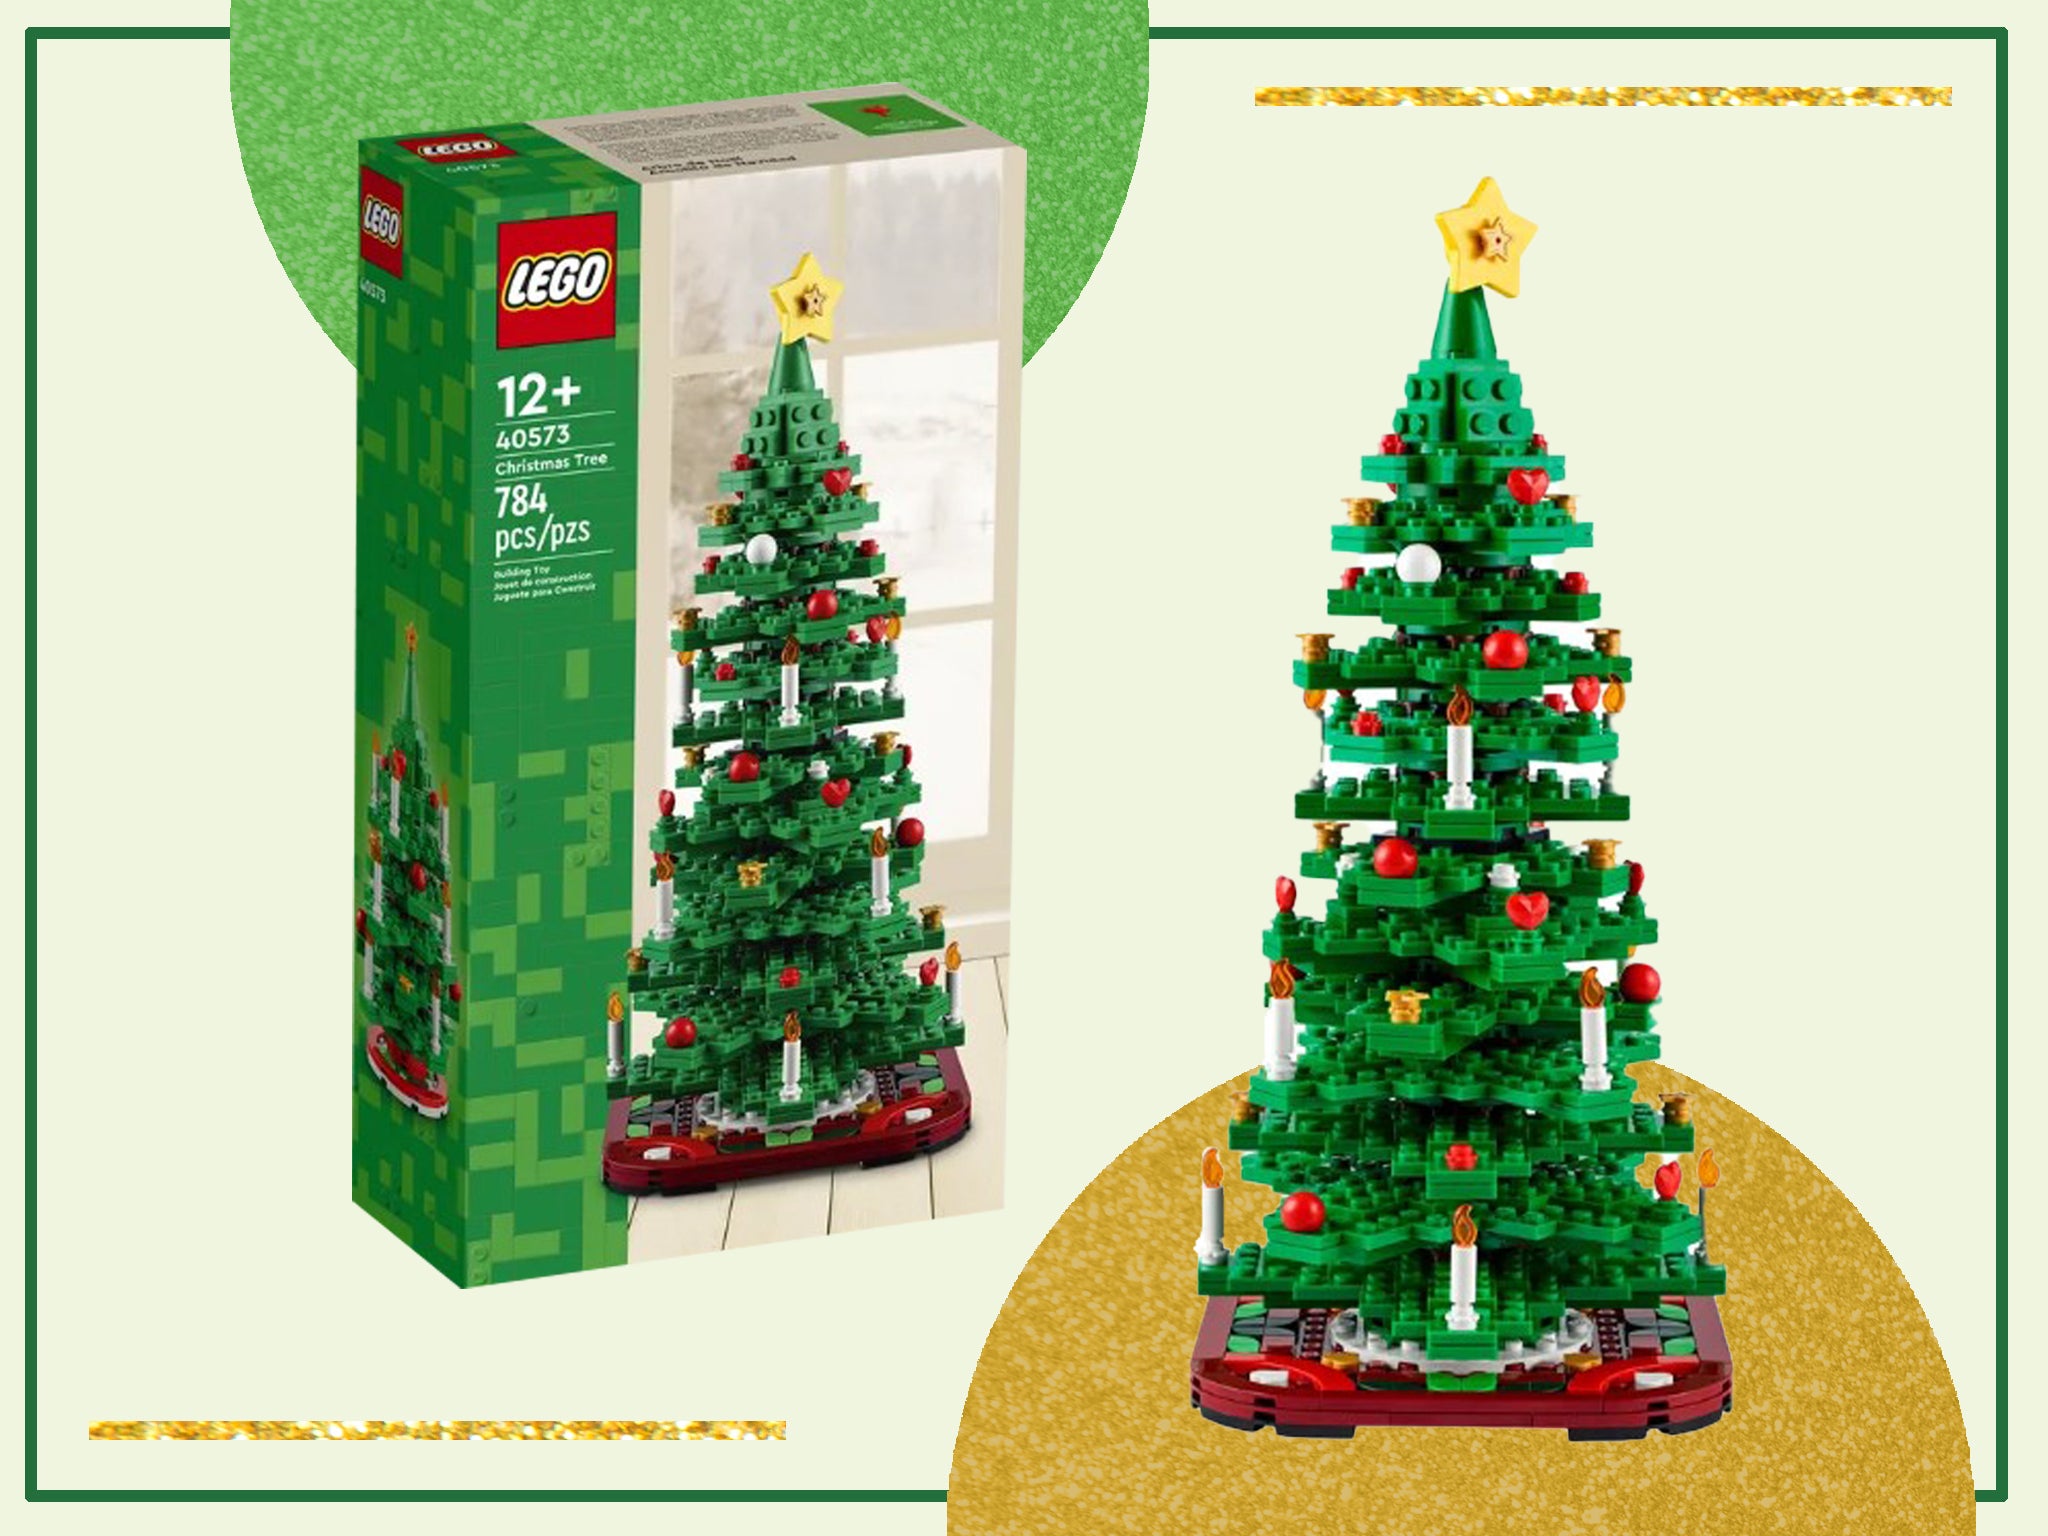 How to Build a LEGO Christmas Tree Ornament with Kids